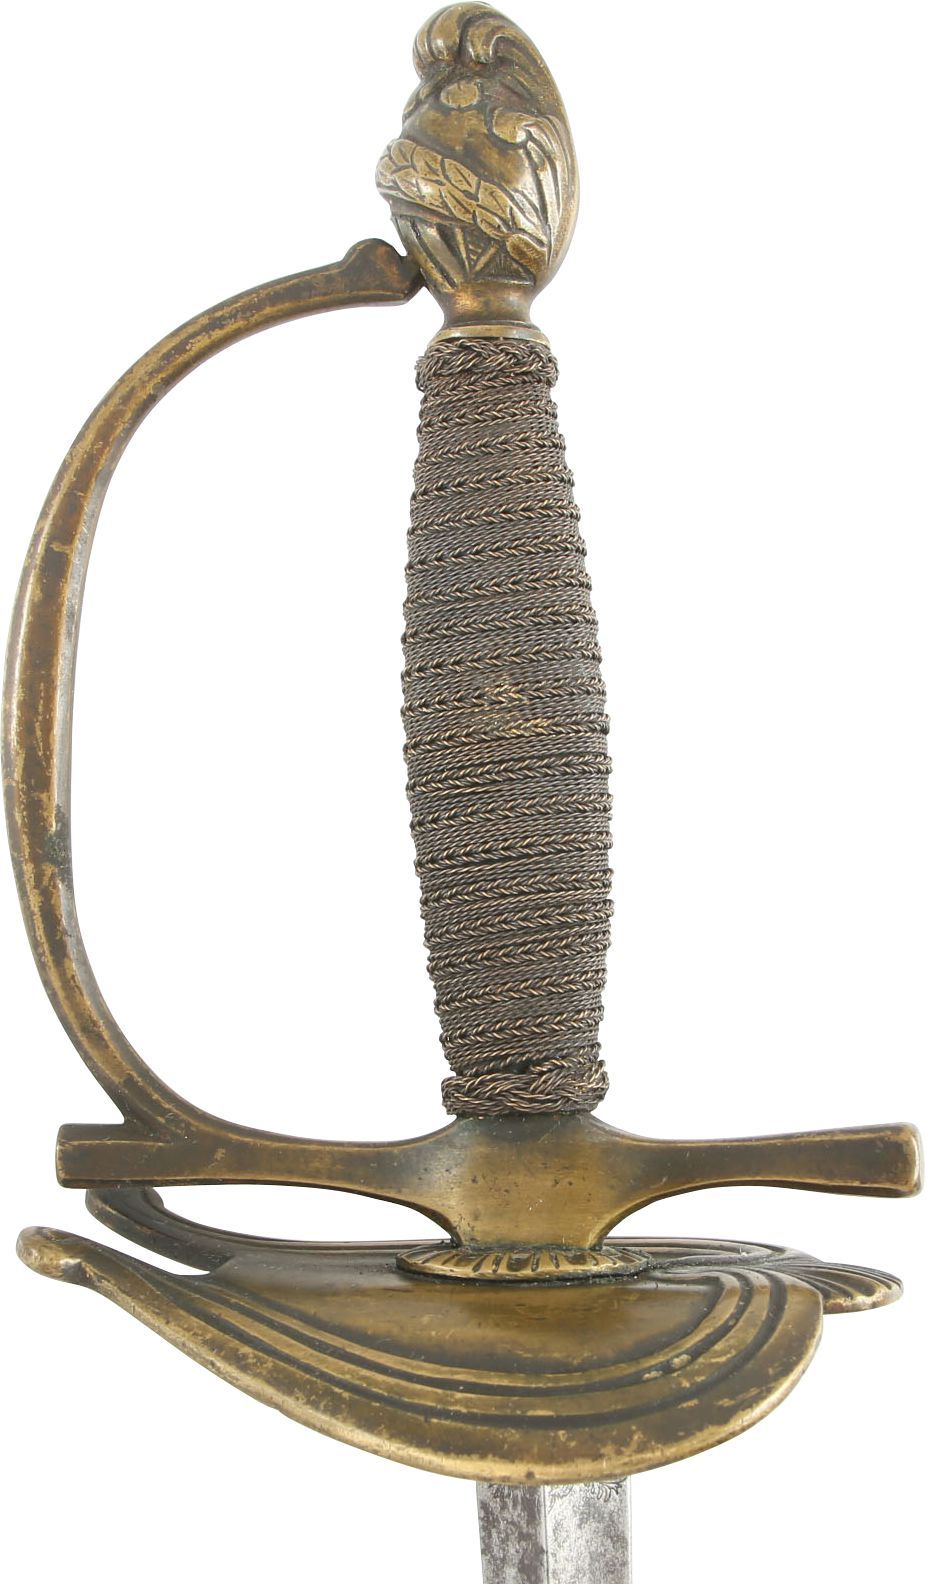 FRENCH OFFICER'S SWORD C.1792-1800 - Fagan Arms